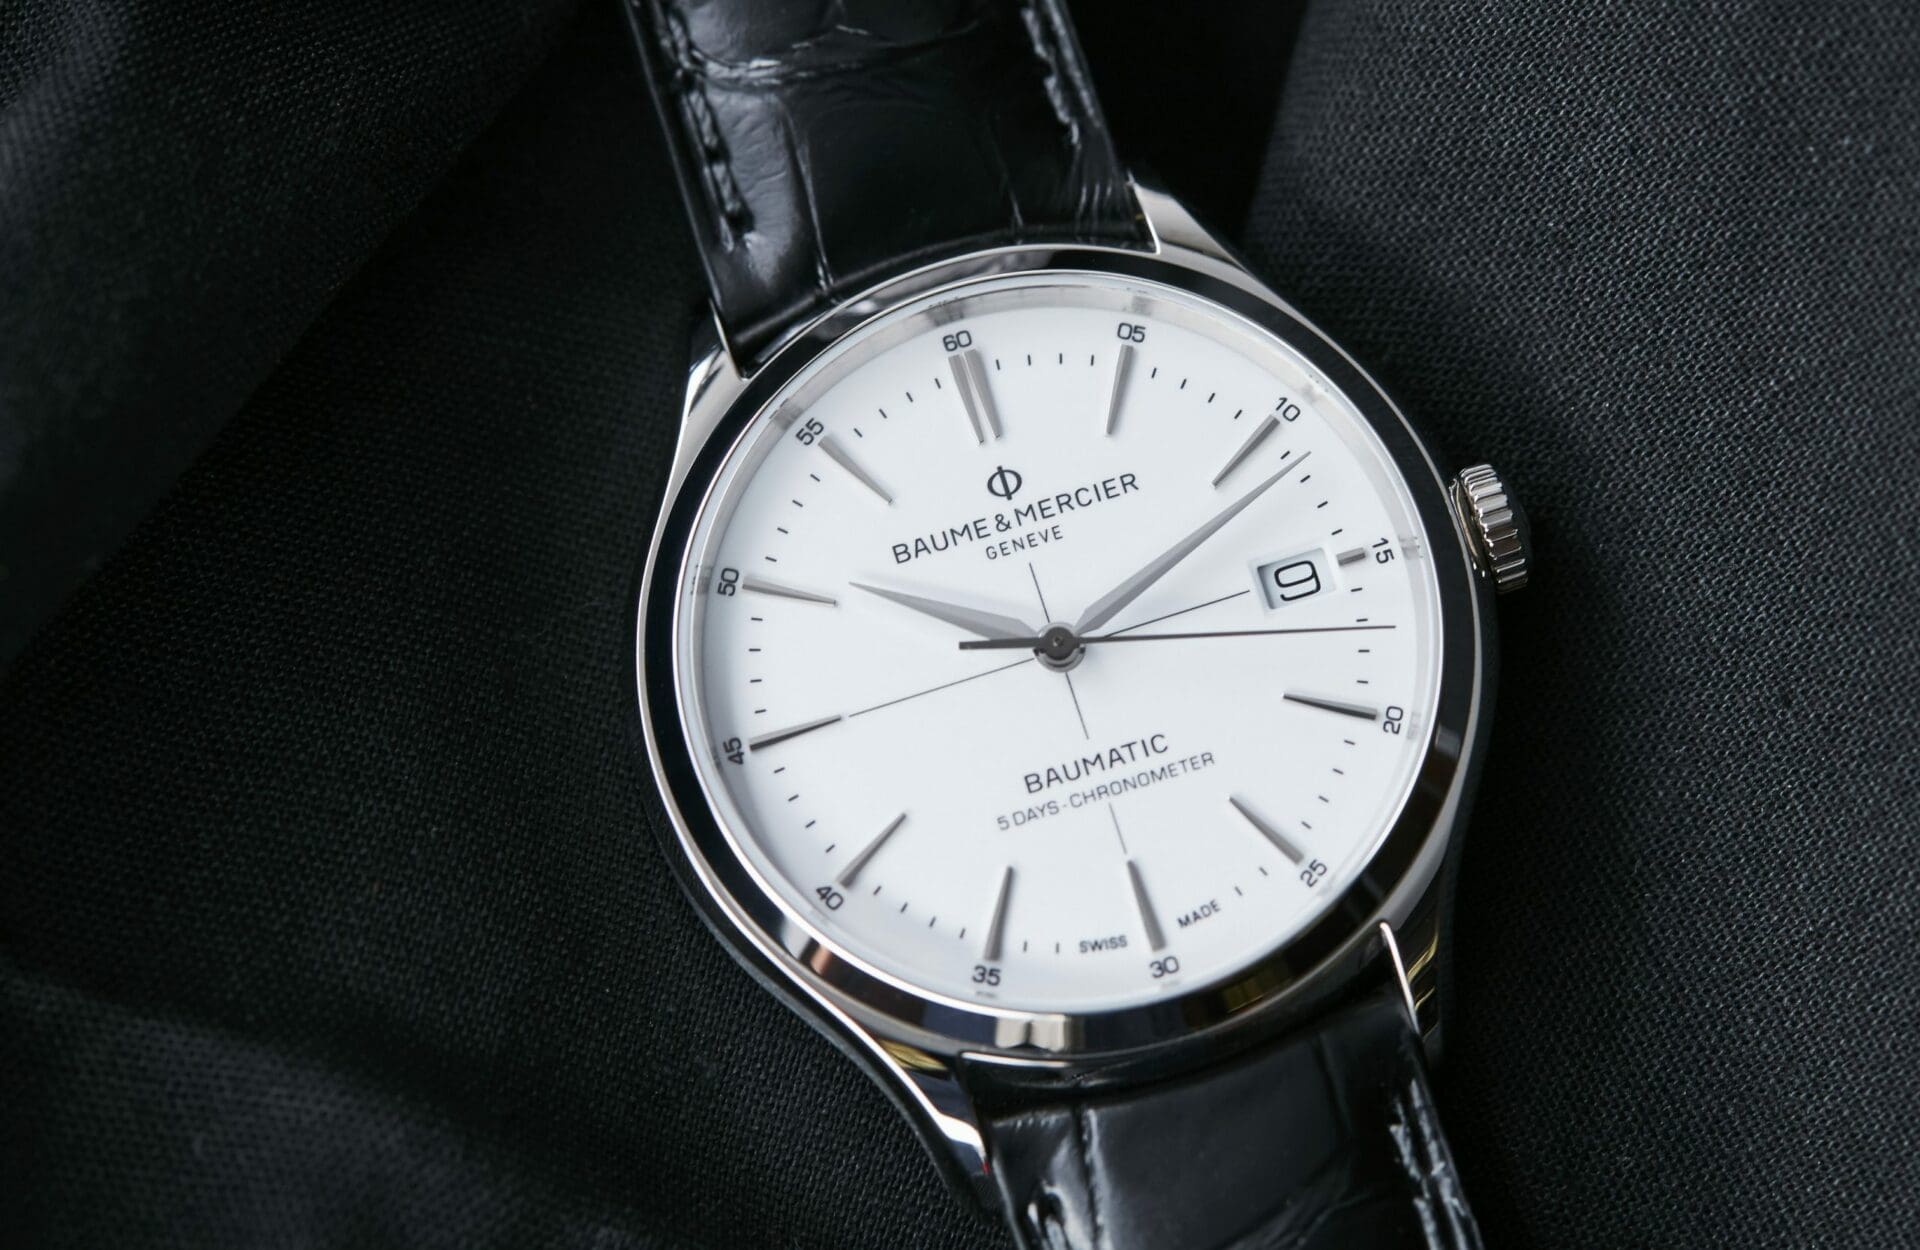 HANDS-ON: The Baume & Mercier Clifton Baumatic 10436 White Dial